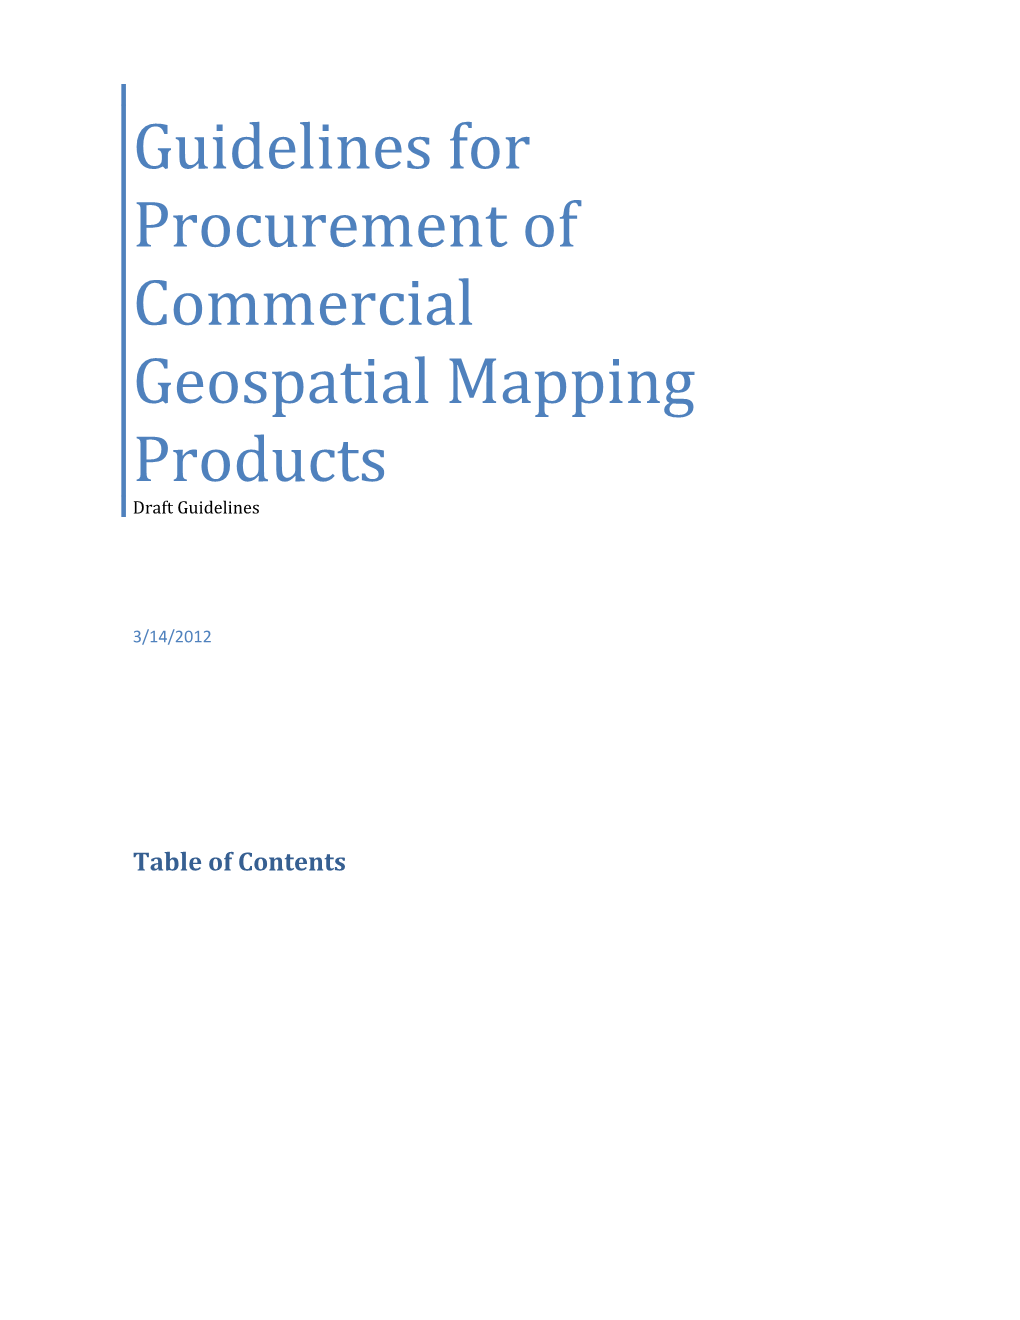 Guidelines for Procurement of Commercial Geospatial Mapping Products